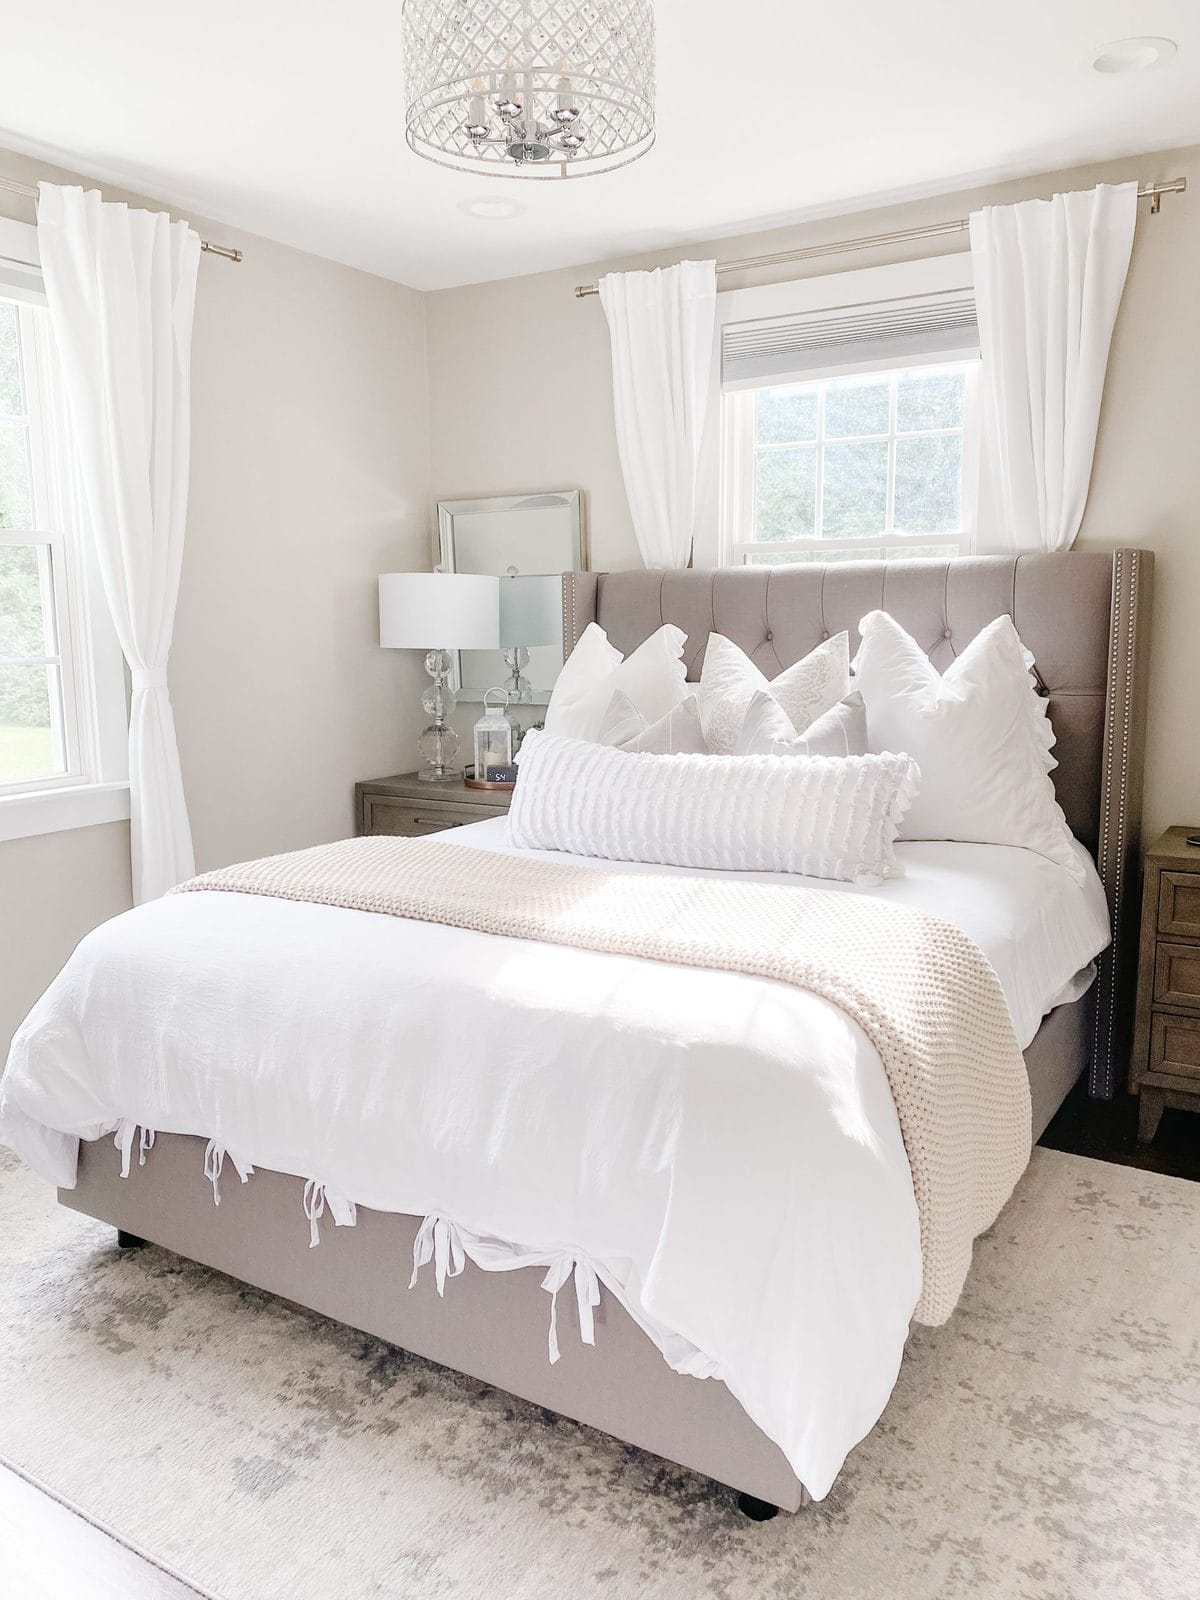 Farmhouse glam bedroom with textured cream knit blanket, white textured lumbar pillow, grey and white striped pillows, white ruffled euro pillows, grey tufted headboard, grey nightstands, crystal nightstand lamps, mirrors